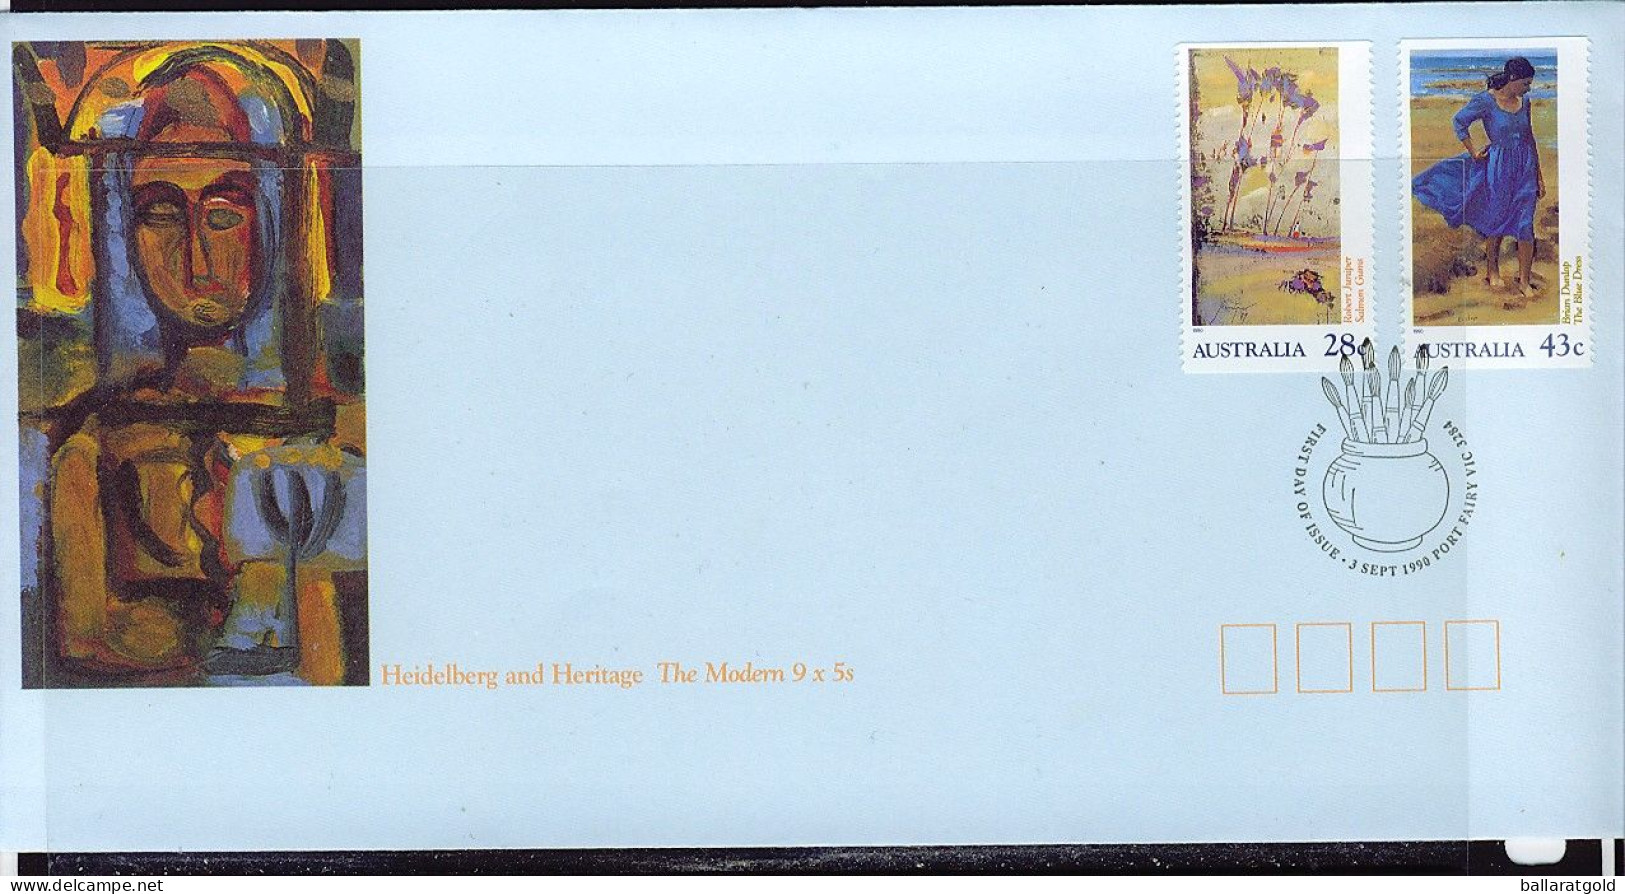 Australia 1990 Heidelberg Painters APM22520 First Day Cover - Covers & Documents